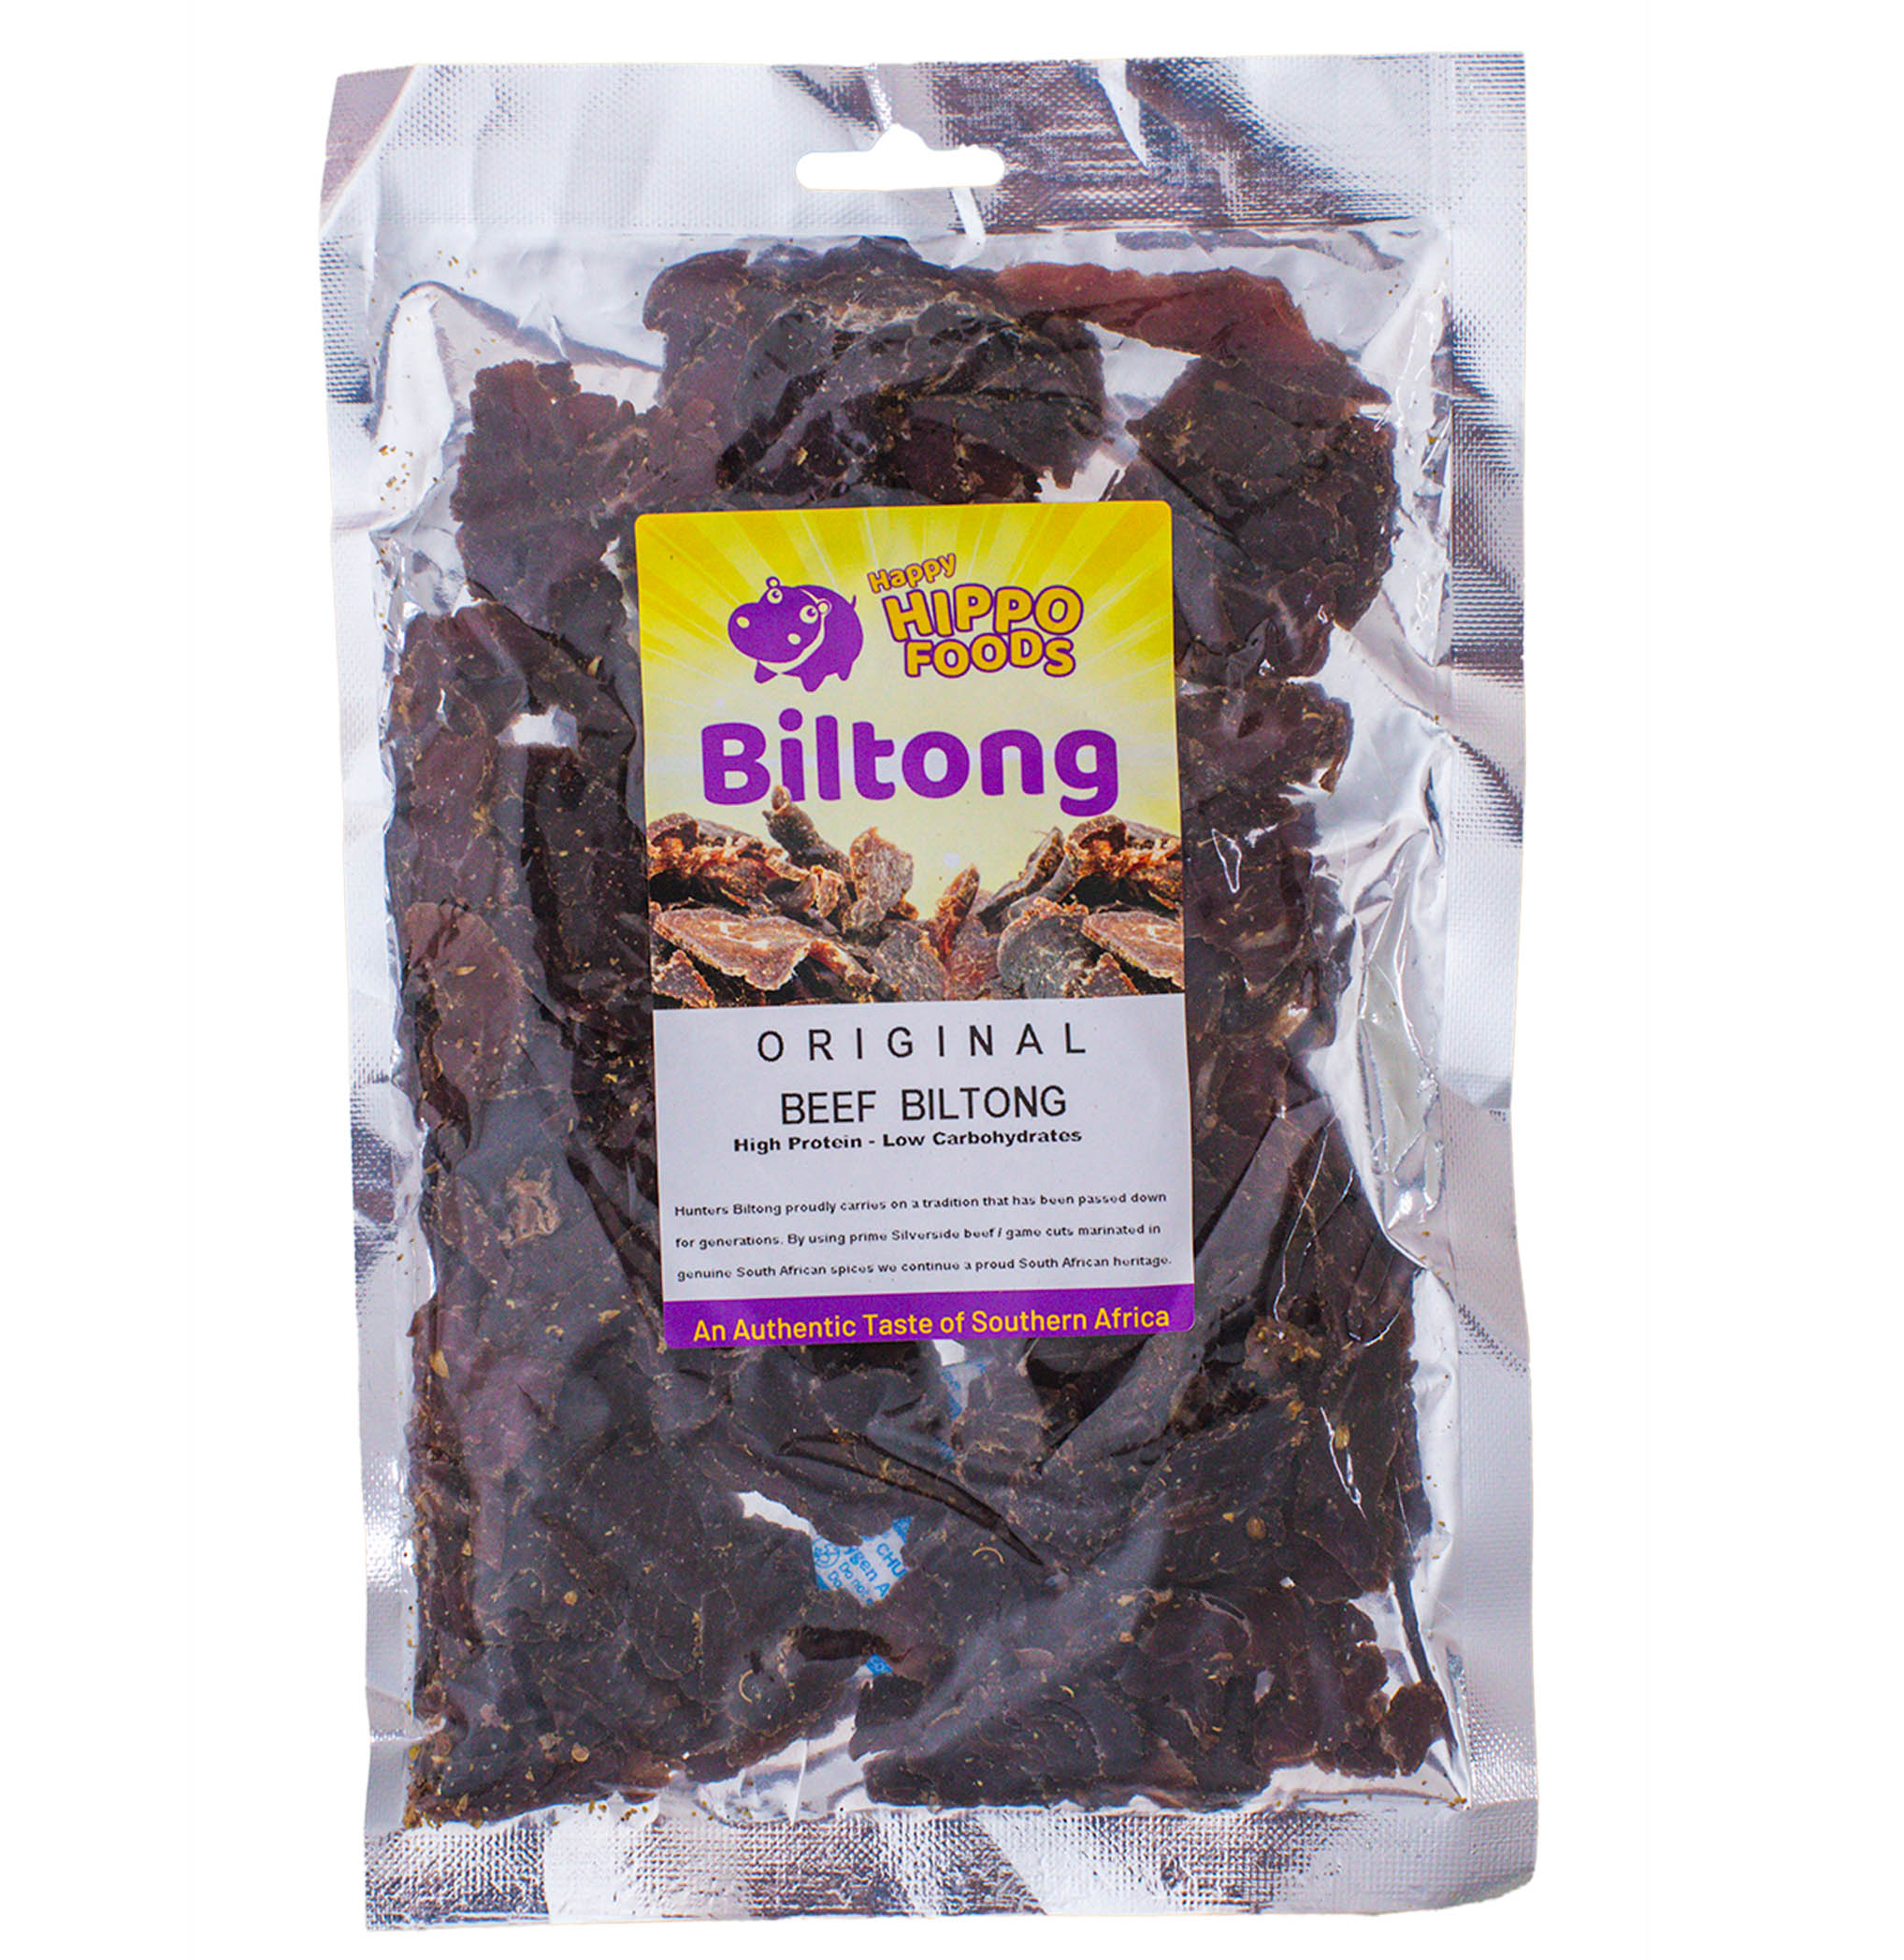 Original Beef Biltong Prime cuts of grass fed Beef marinated in authentic South African Spices which include Nutmeg, Coriander, Rock Salt and Black Pepper. No over powering flavours, the perfect balance of Beef and spices which is fast becoming our most popular Biltong. Gluten and MSG Free / Free from artificial colours and flavourings.